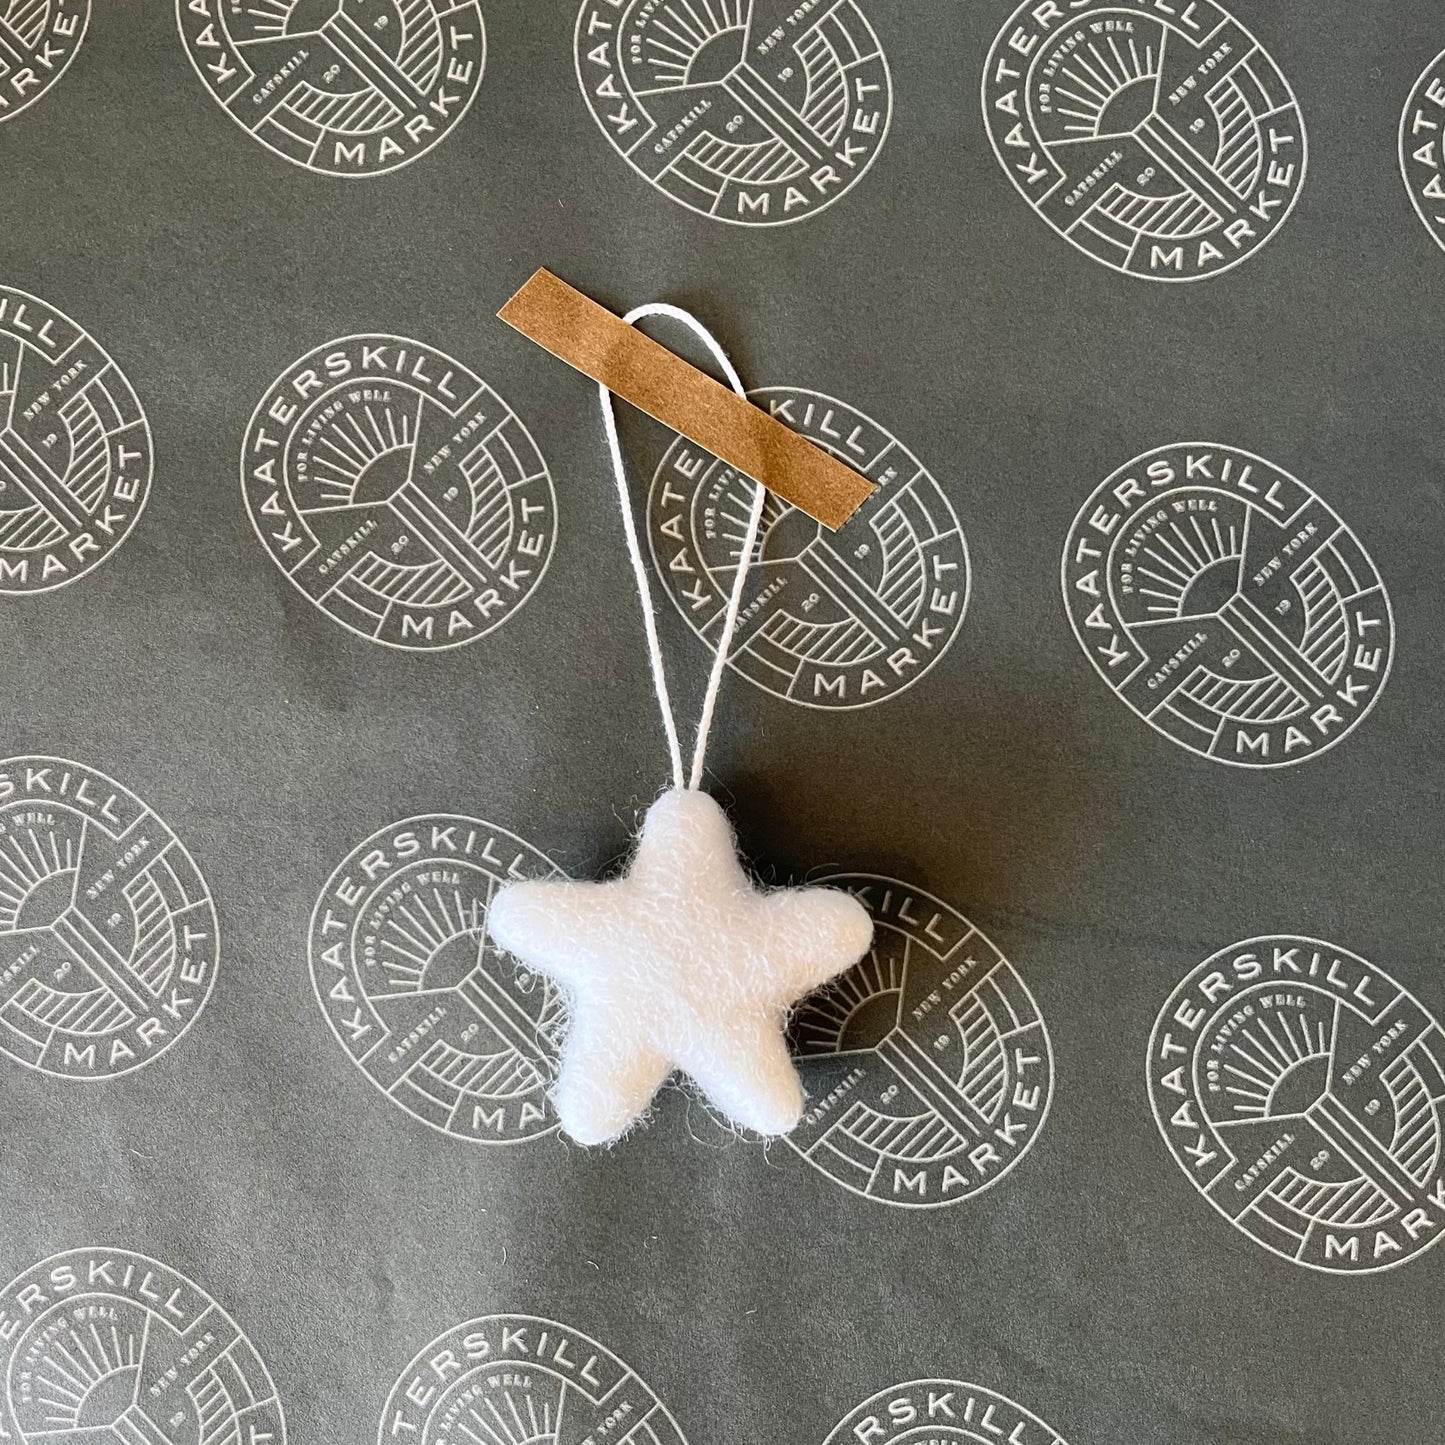 Handmade felted wool star ornament for decorating a holiday tree or adorning a gift